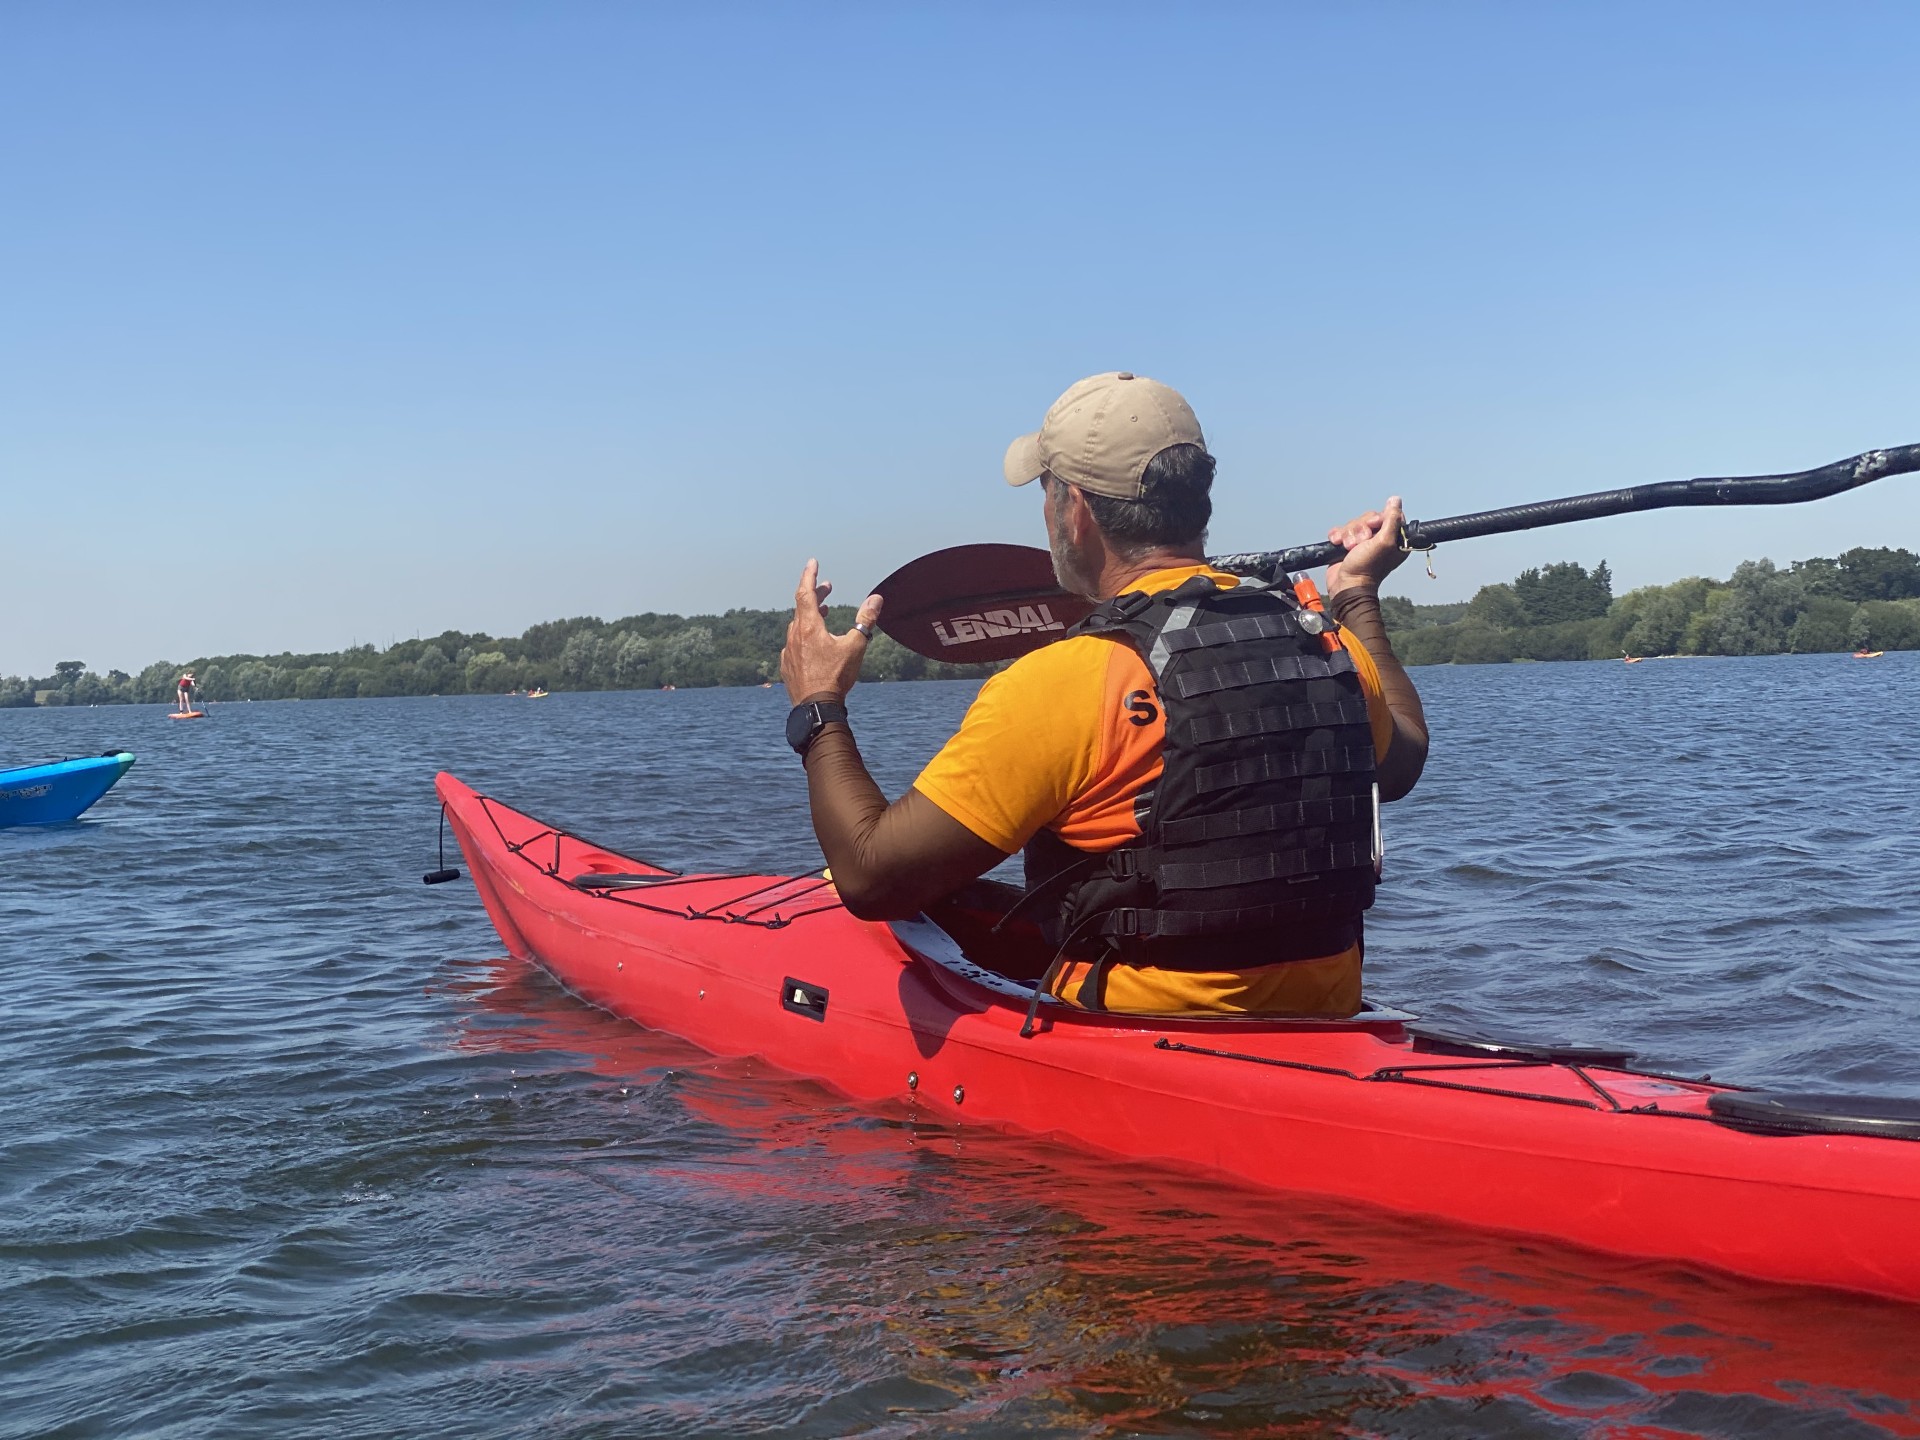 Coach teaching on the water from a red sea kayak.